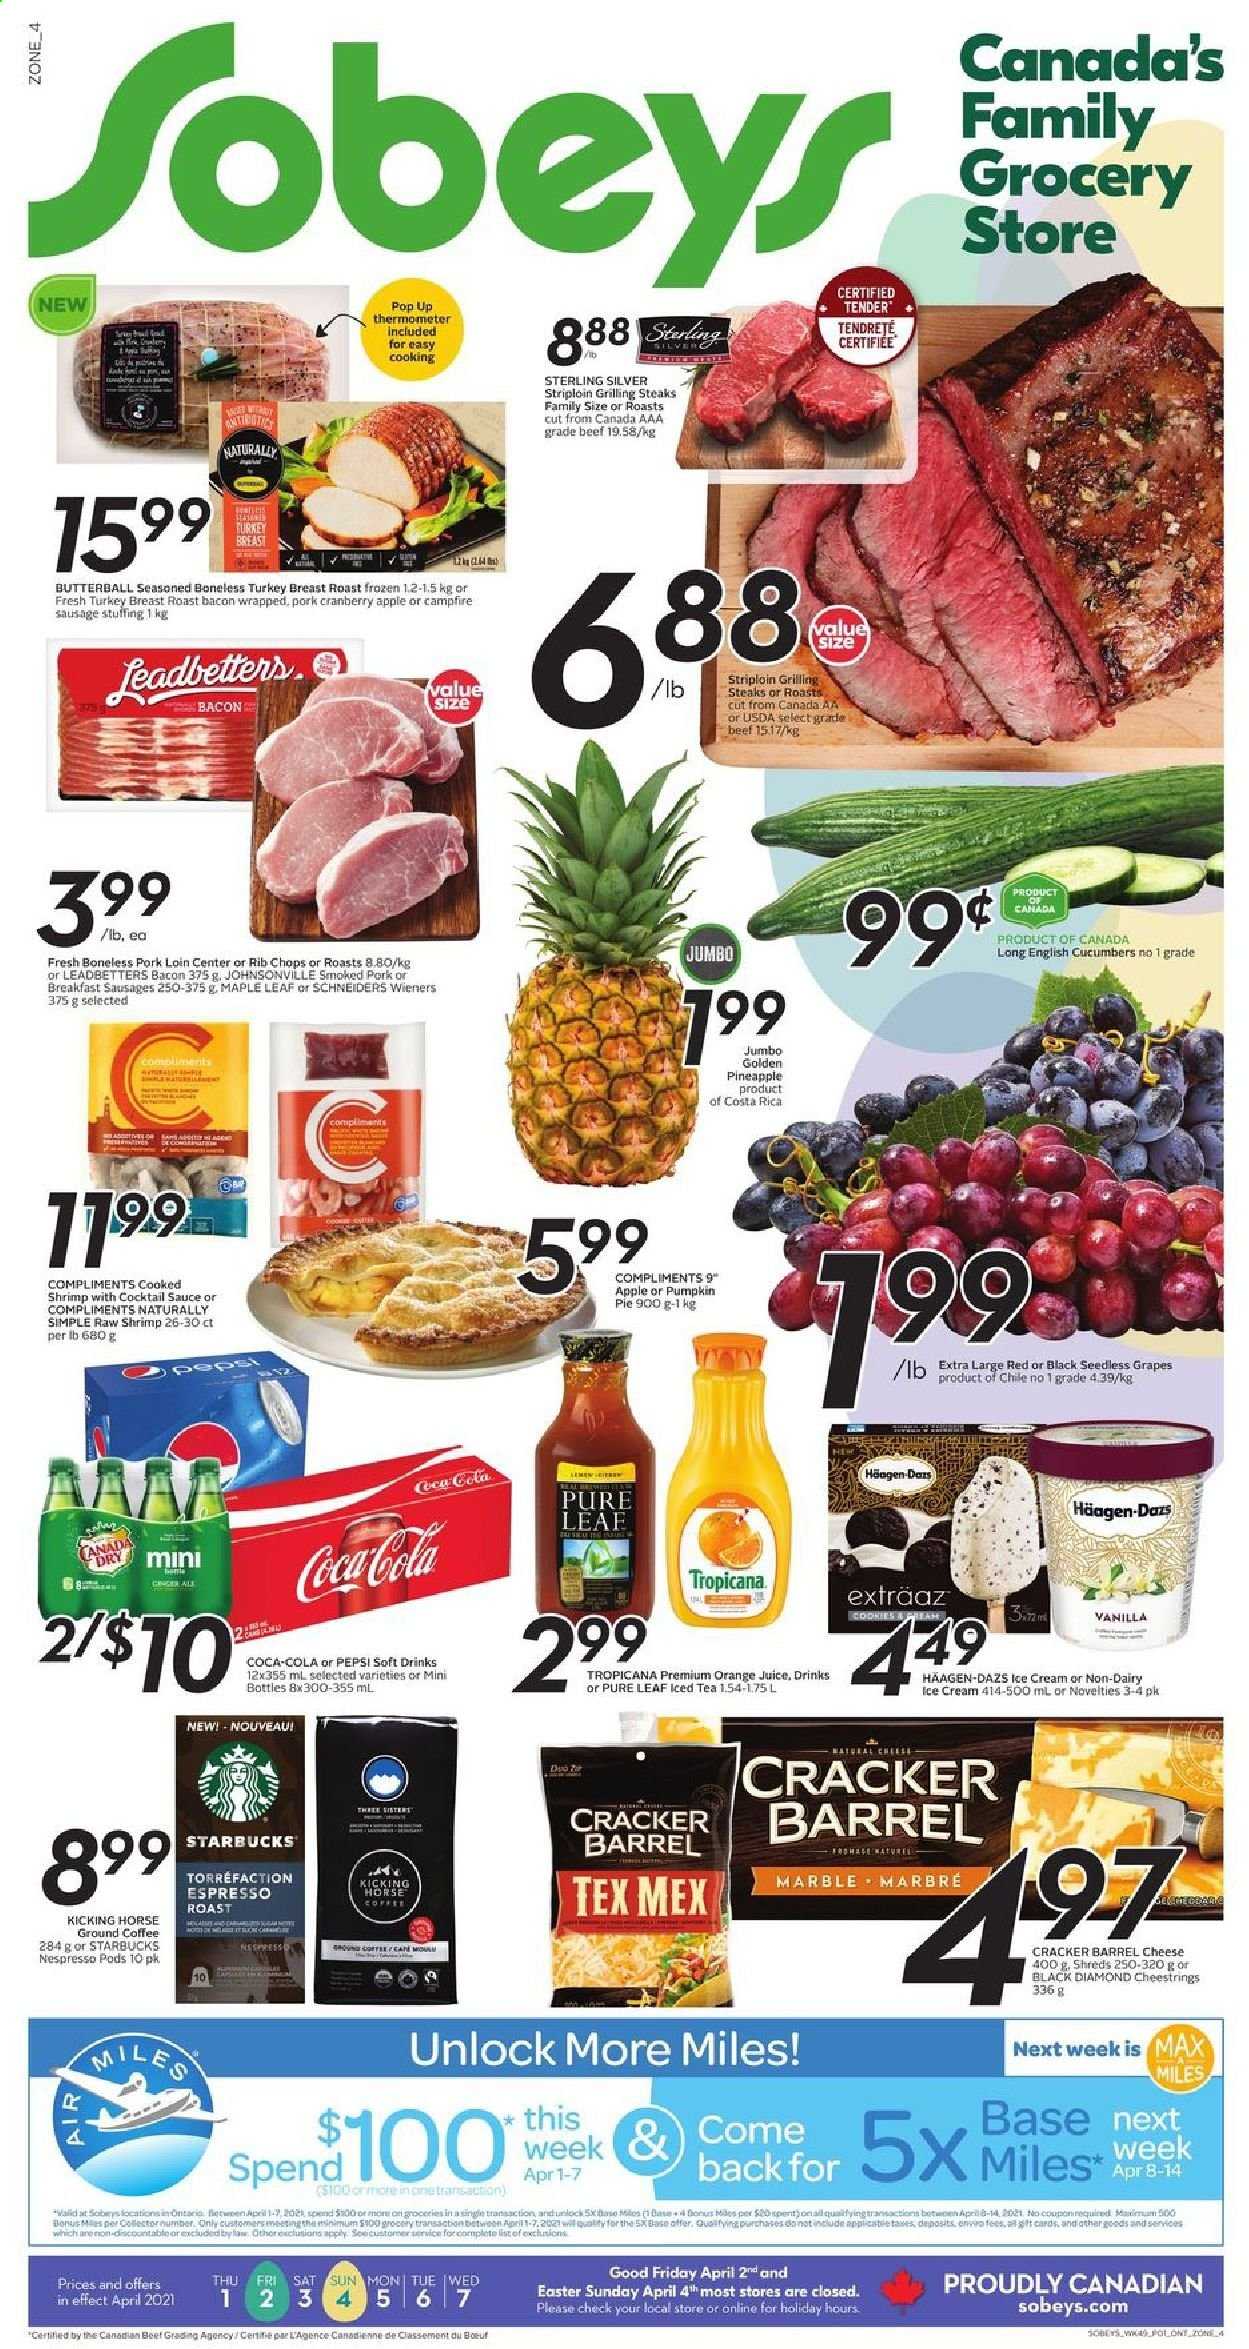 thumbnail - Sobeys Flyer - April 01, 2021 - April 07, 2021 - Sales products - pie, cucumber, pumpkin, grapes, seedless grapes, pineapple, shrimps, bacon, Butterball, Johnsonville, sausage, string cheese, cheese, Häagen-Dazs, cookies, crackers, cocktail sauce, Coca-Cola, Pepsi, orange juice, juice, ice tea, soft drink, Pure Leaf, coffee, Nespresso, ground coffee, Starbucks, turkey breast, turkey, pork loin, pork meat, rib chops, thermometer, steak. Page 1.